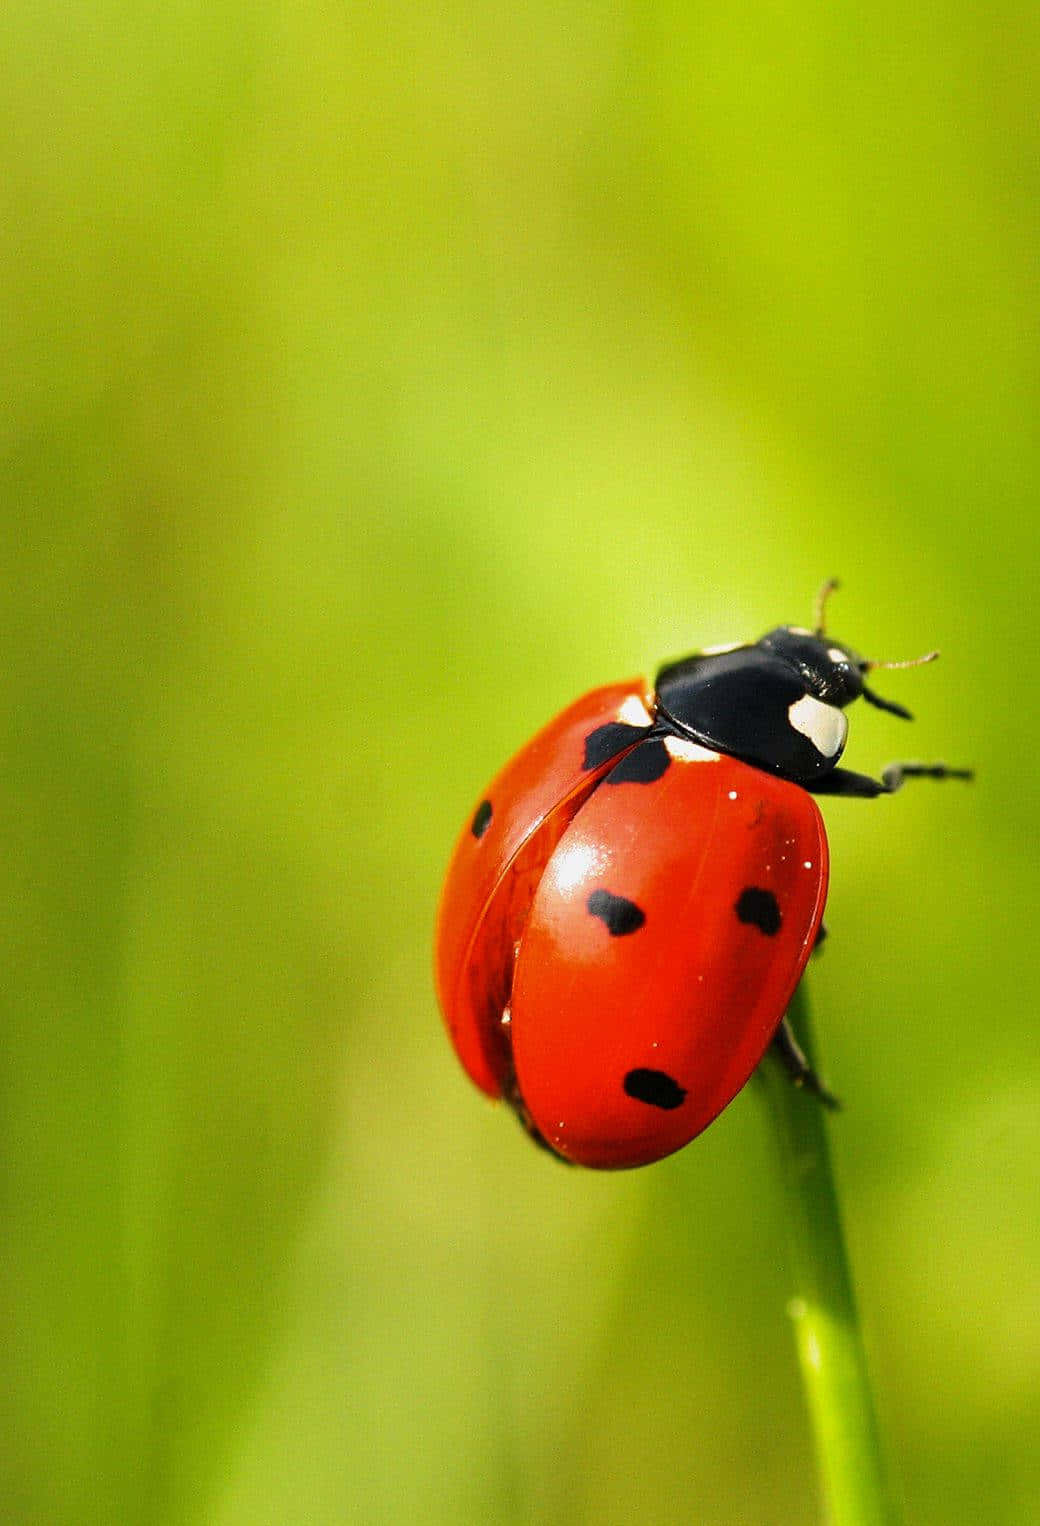 Show Off Your Fun Side with This Colorful Ladybug iPhone Case Wallpaper